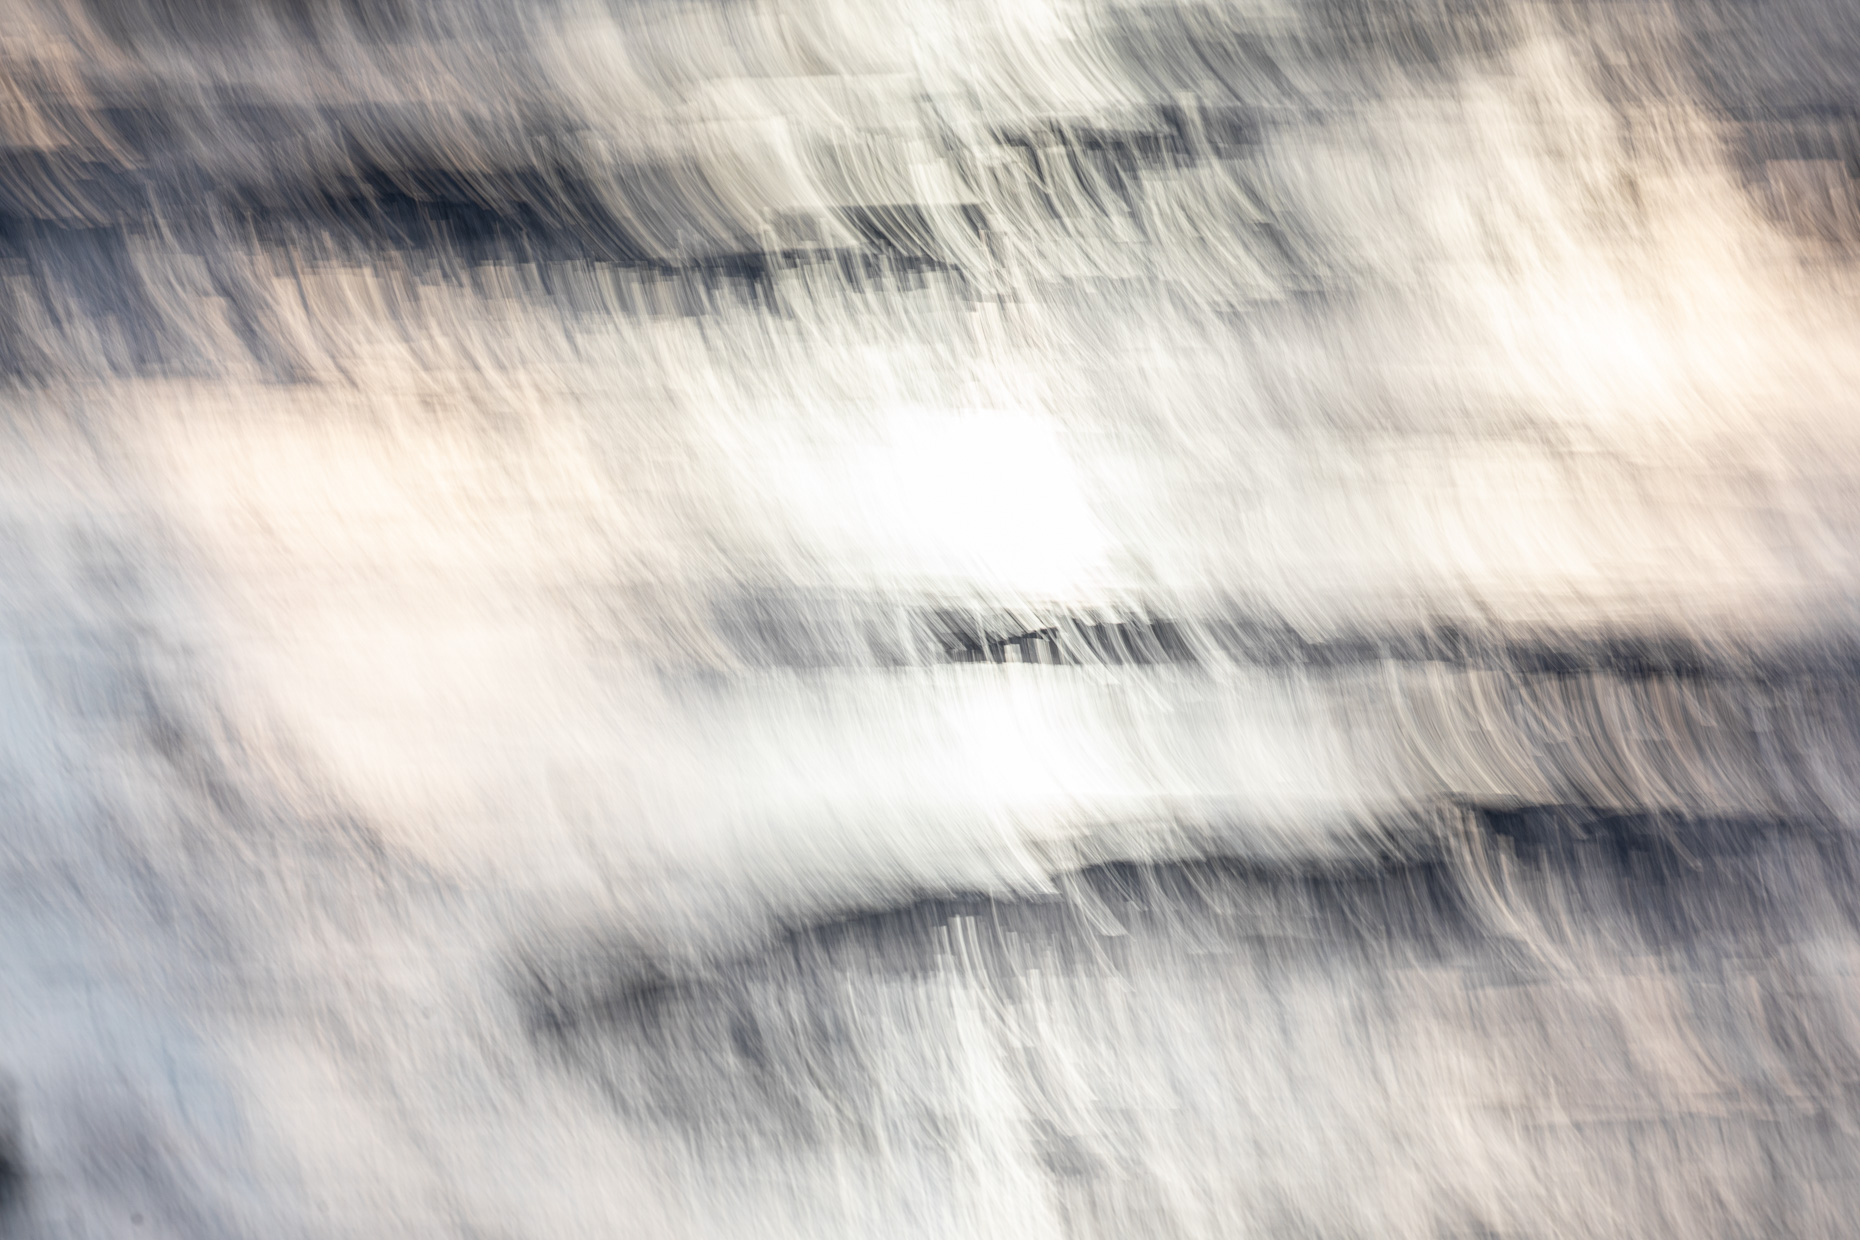 climate_change_winter_ice_Saint_Lawrence_River_Quebec_ICM_intentional_camera_movement-22